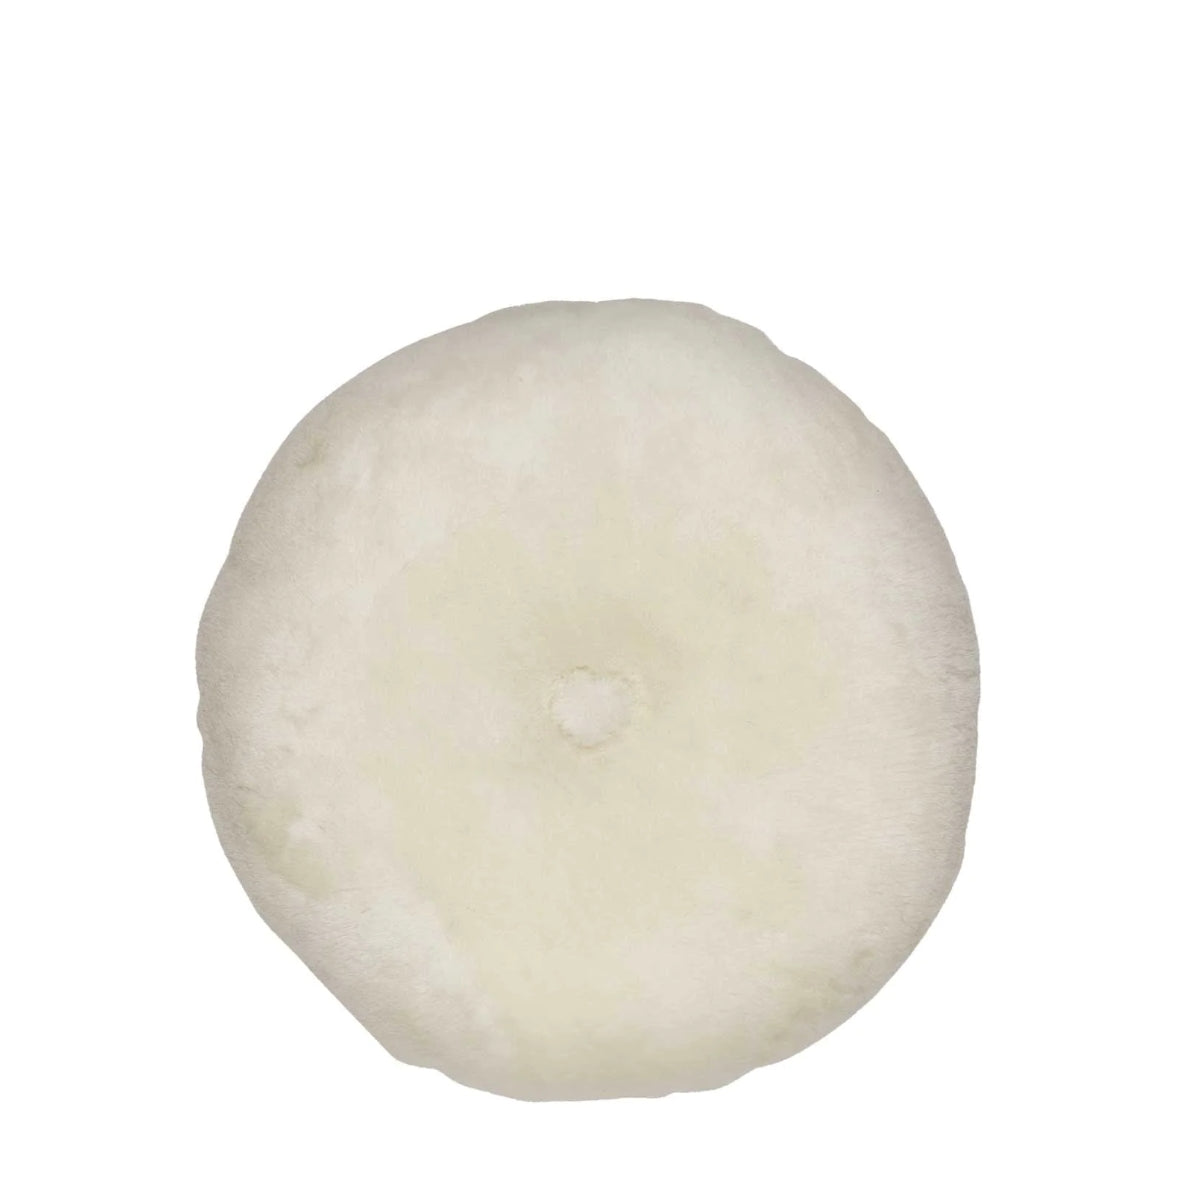 Natures Collection | Double Sided Cushion - Sheepskin - Bolighuset Werenberg 